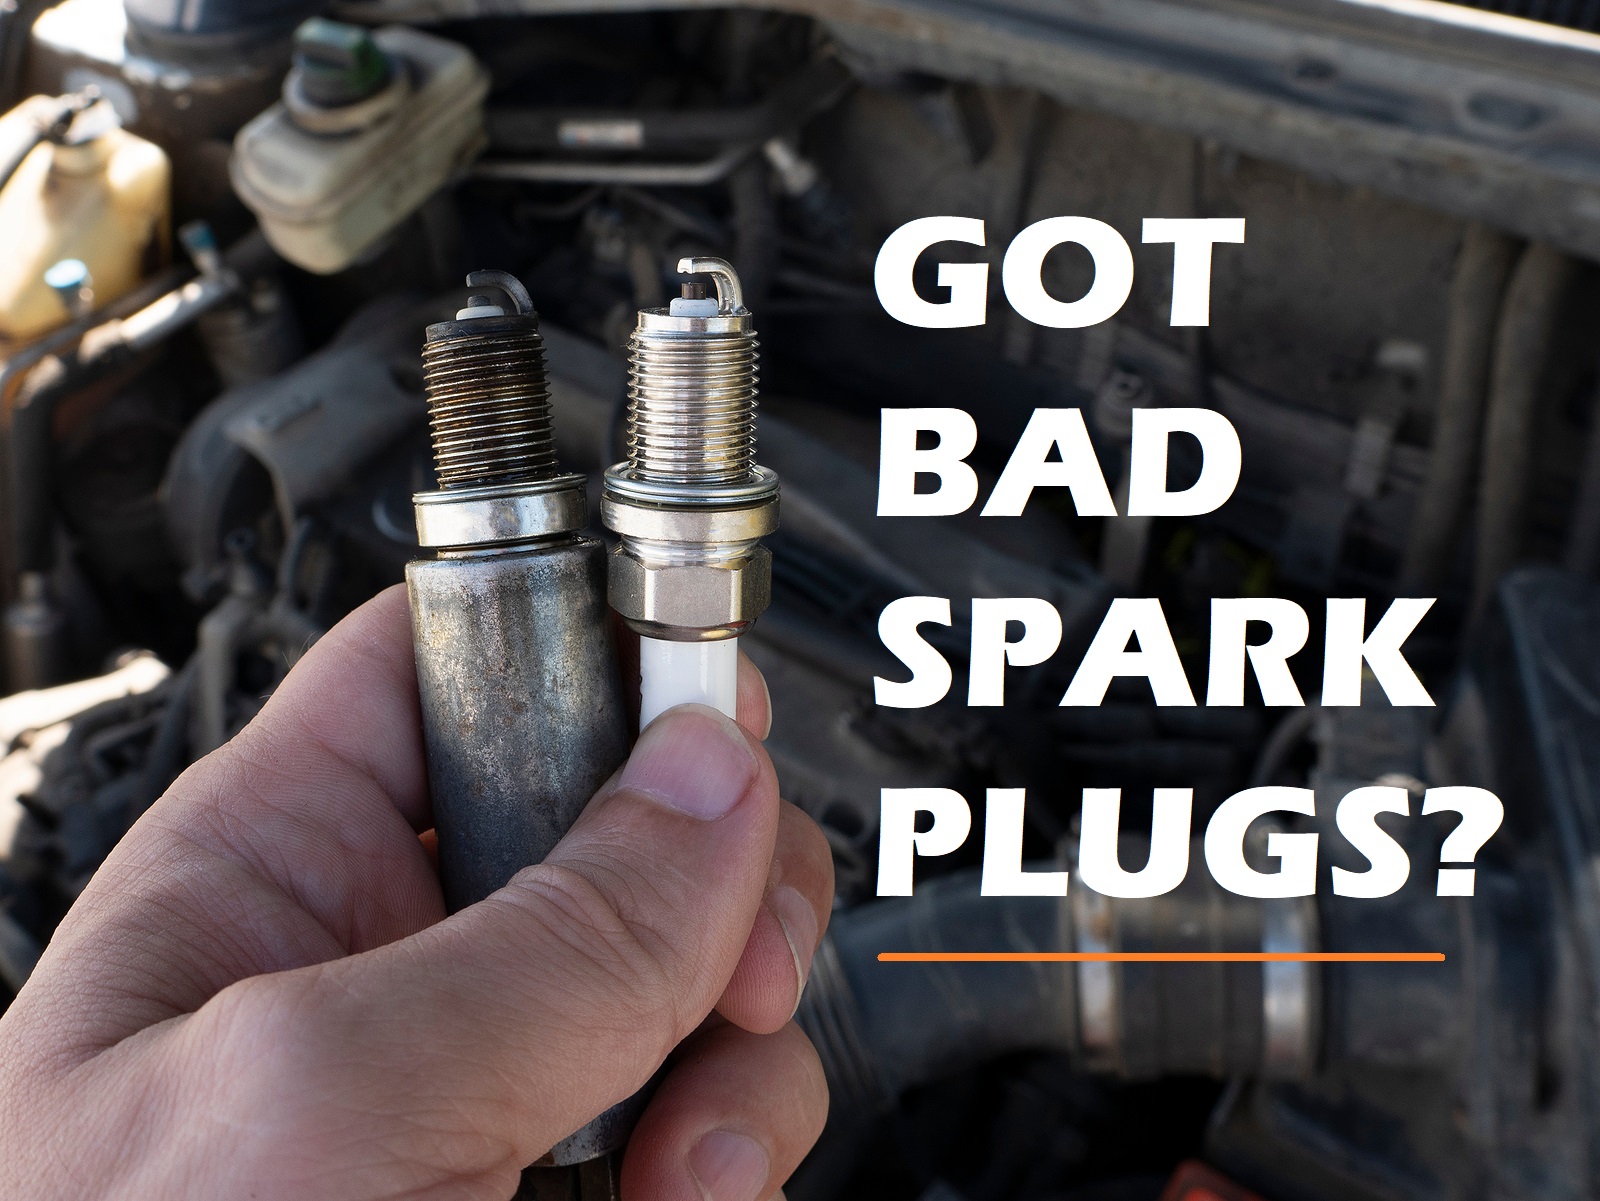 Not Sure When To Change Your Spark Plugs? Look For These 5 Signs